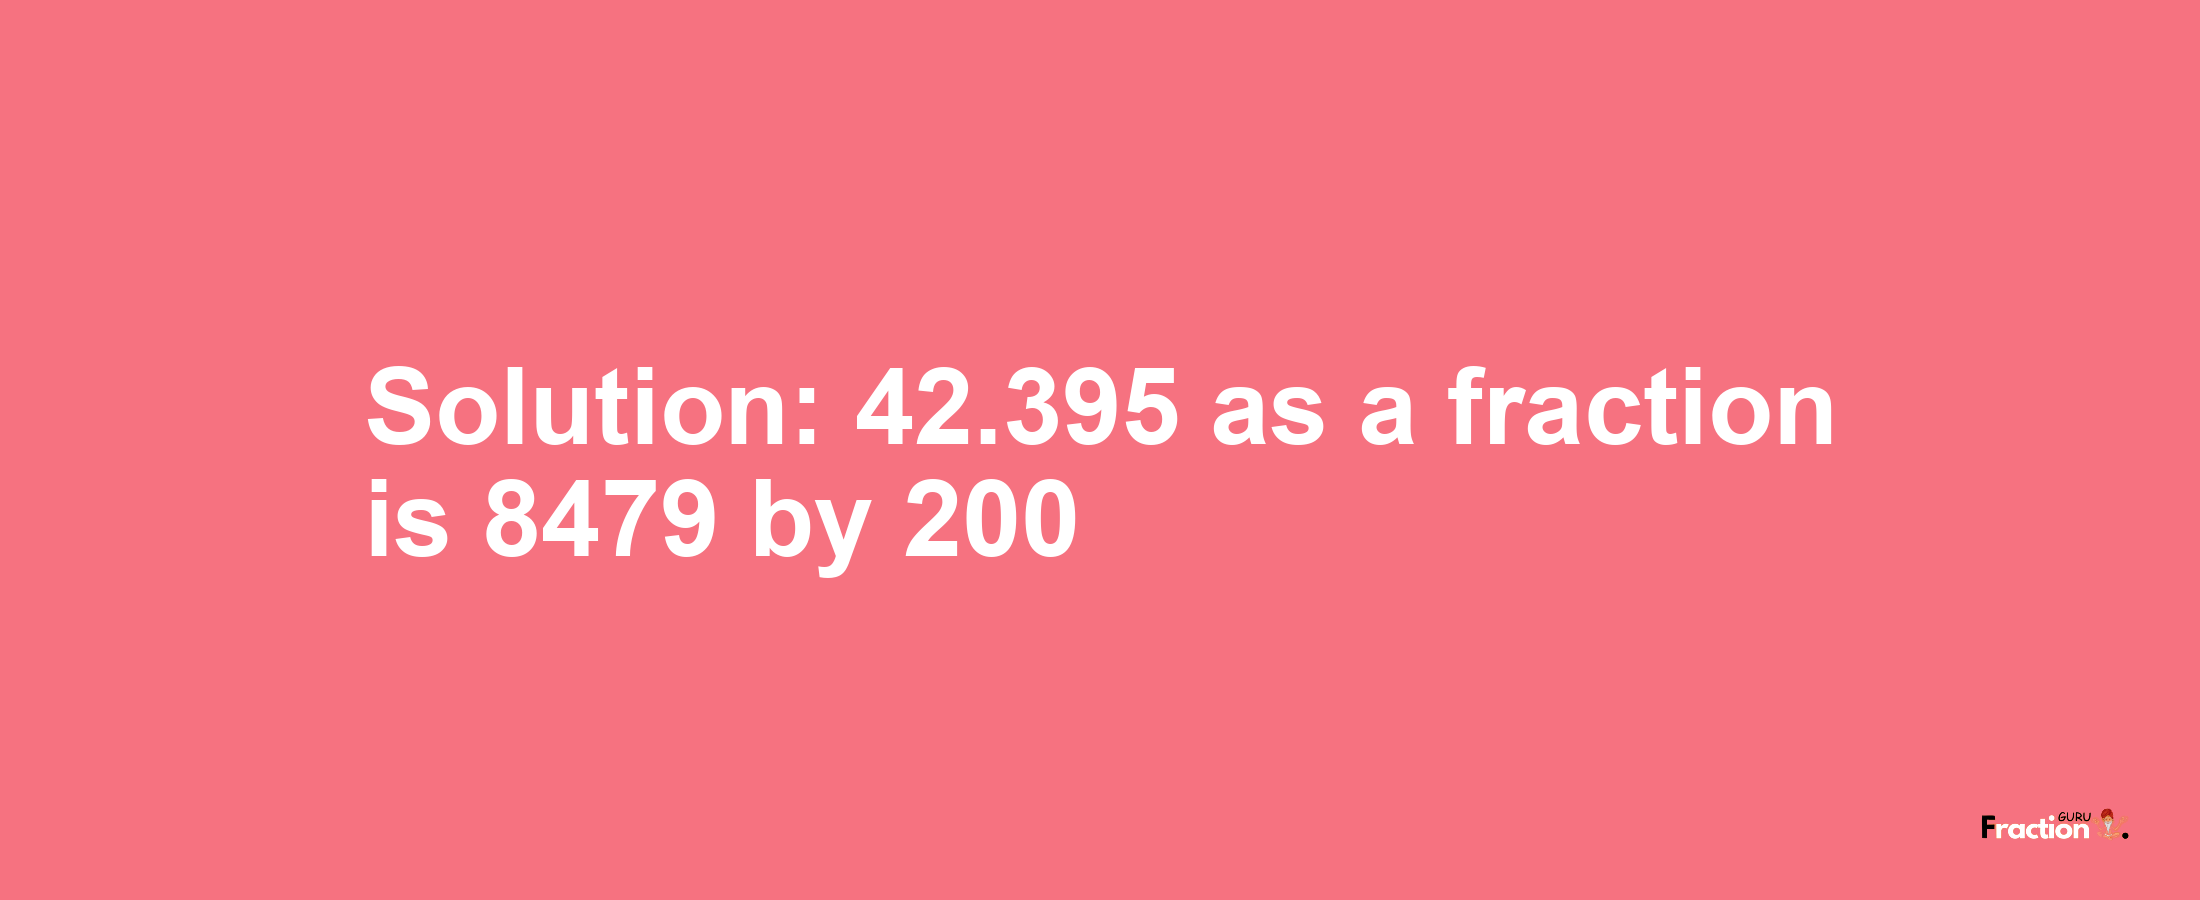 Solution:42.395 as a fraction is 8479/200